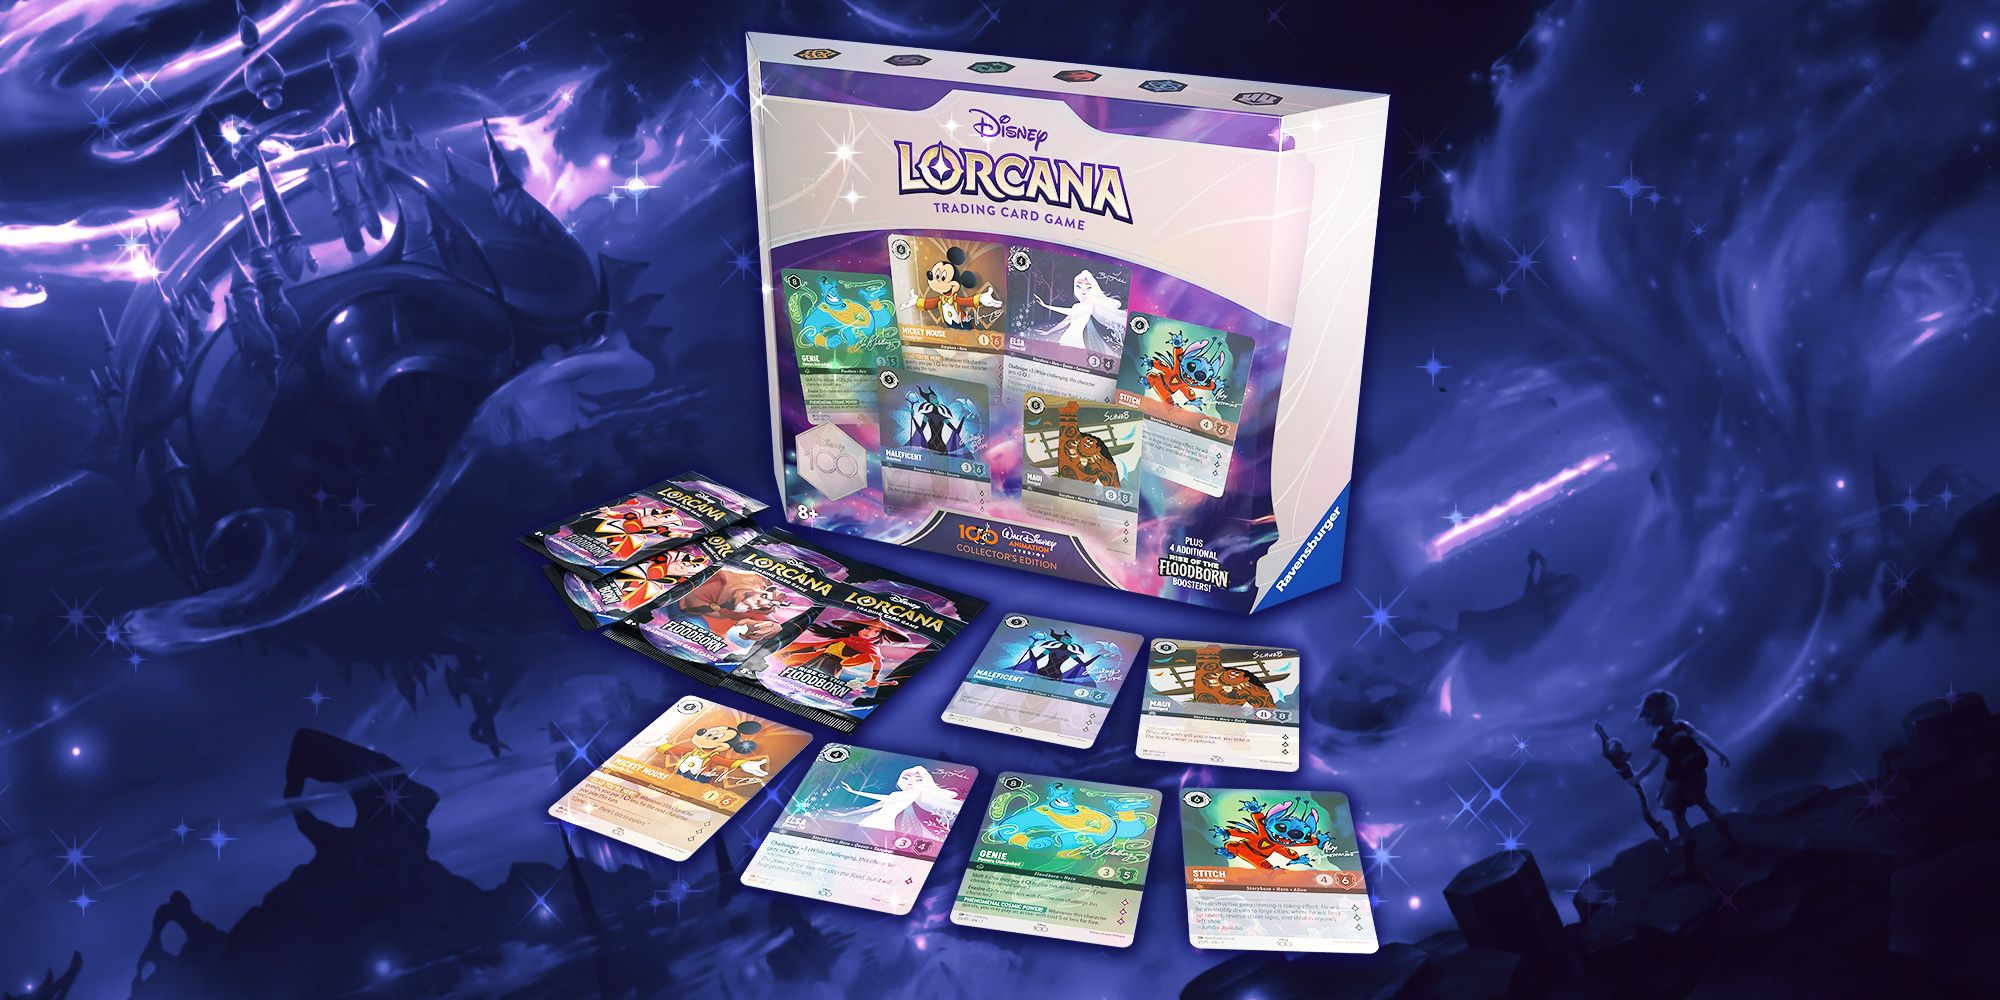 Disney Lorcana D100 Collector's Set box with booster packs and D100 cards in front of a blue Lorcana background.